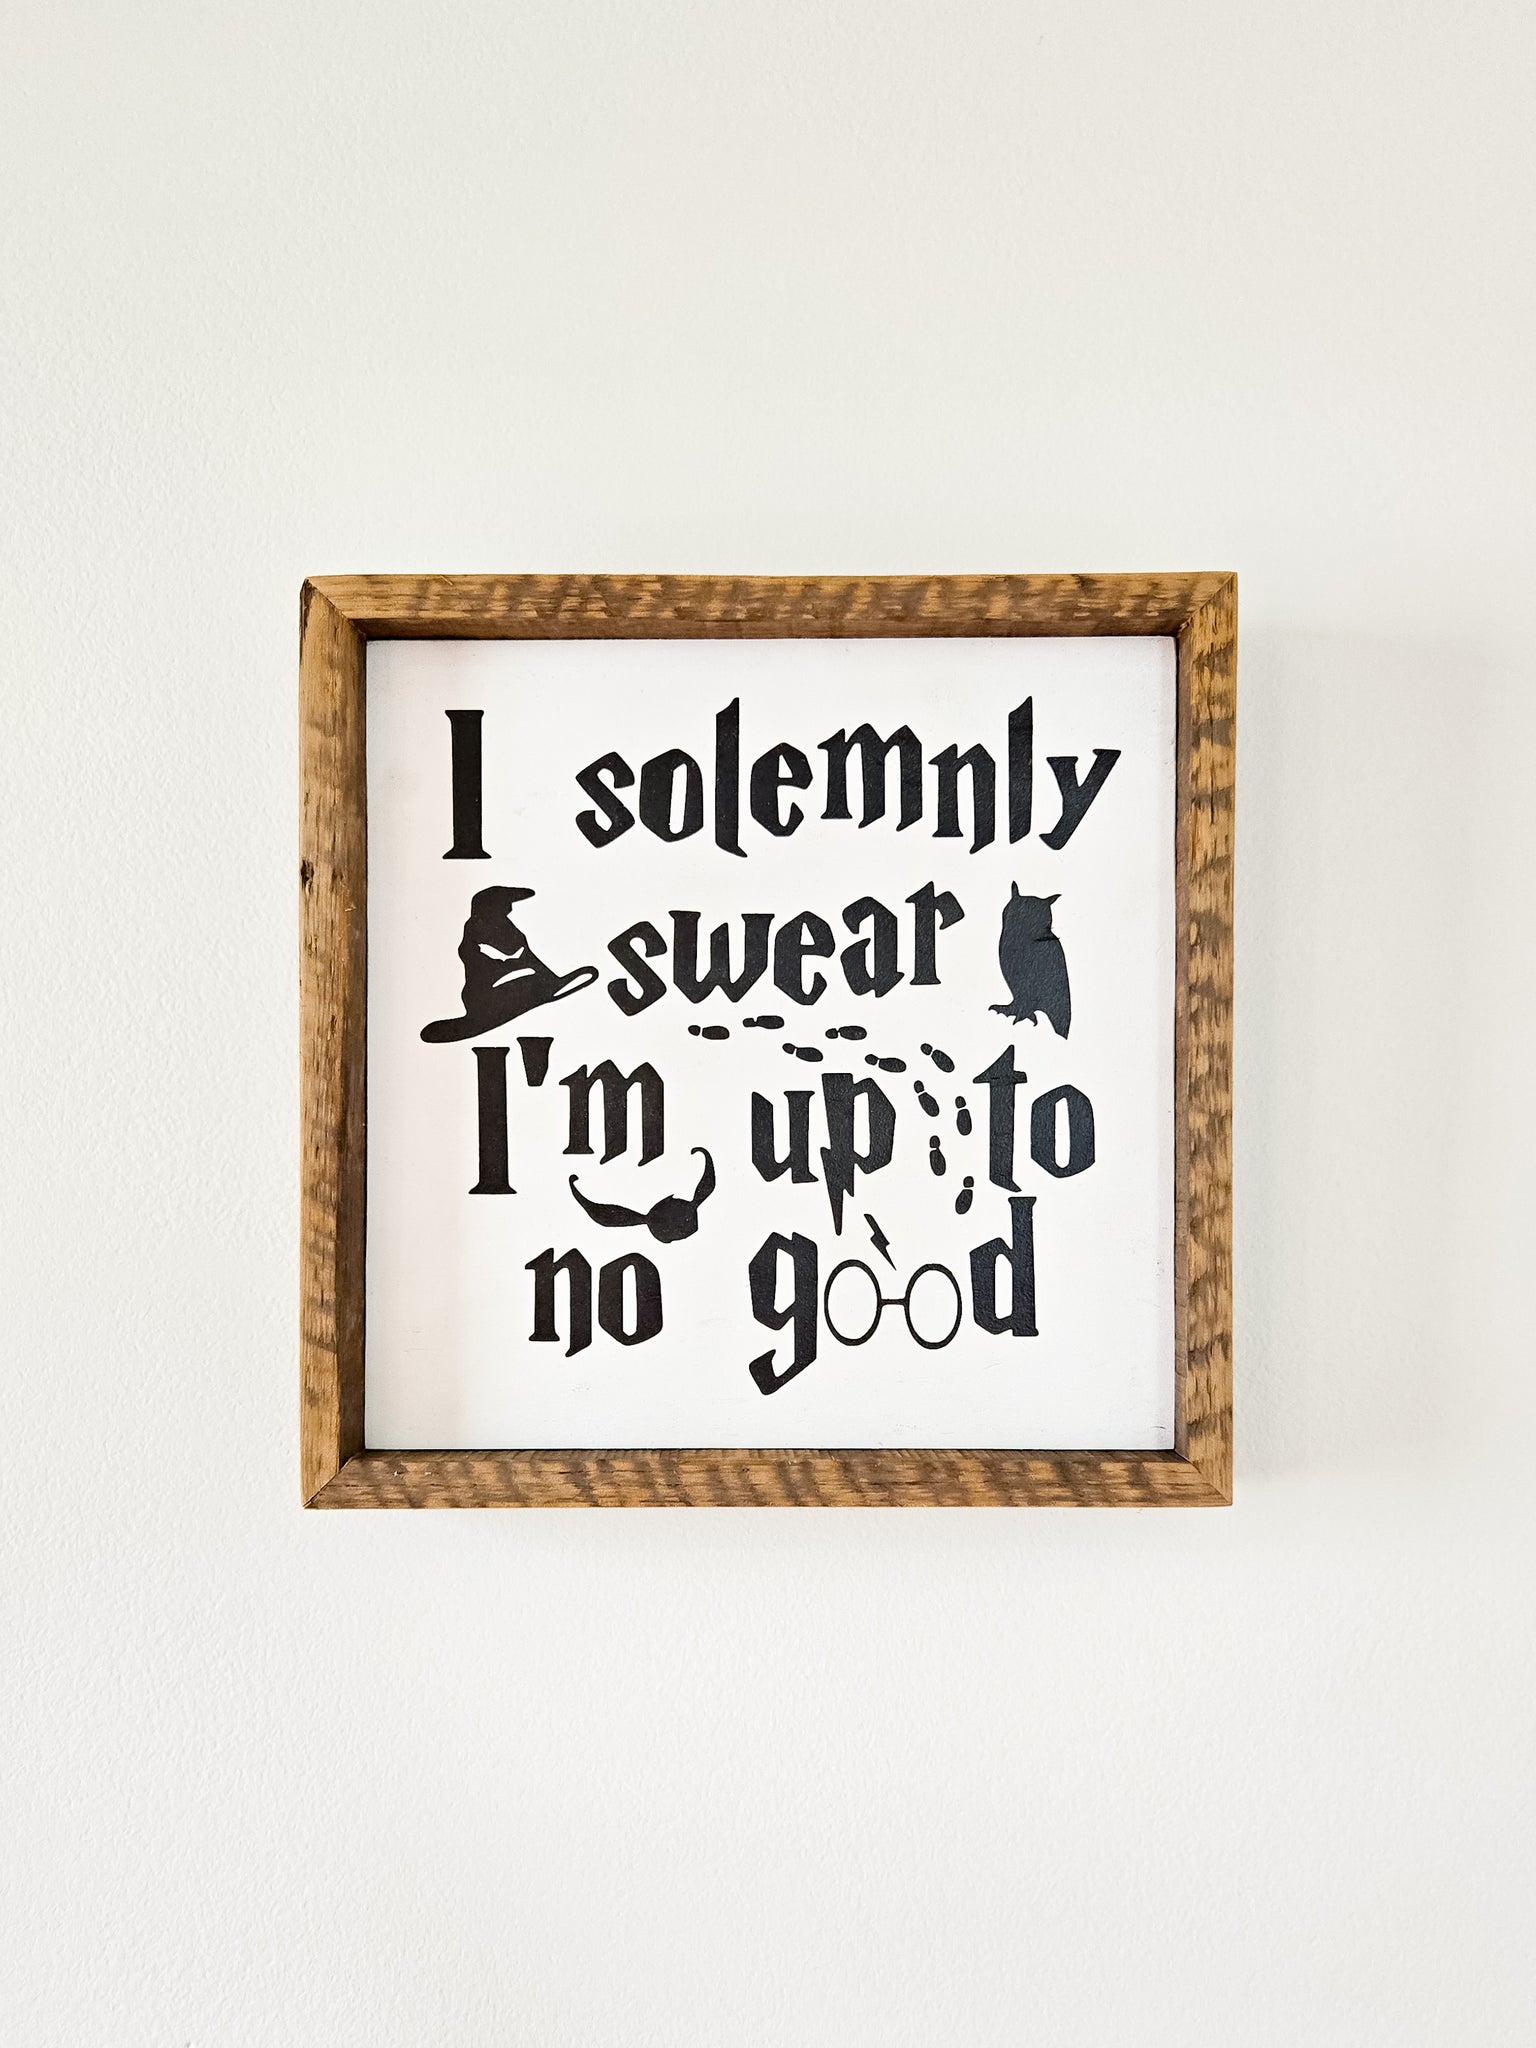 9x9 I solemnly swear I'm up to no good sign